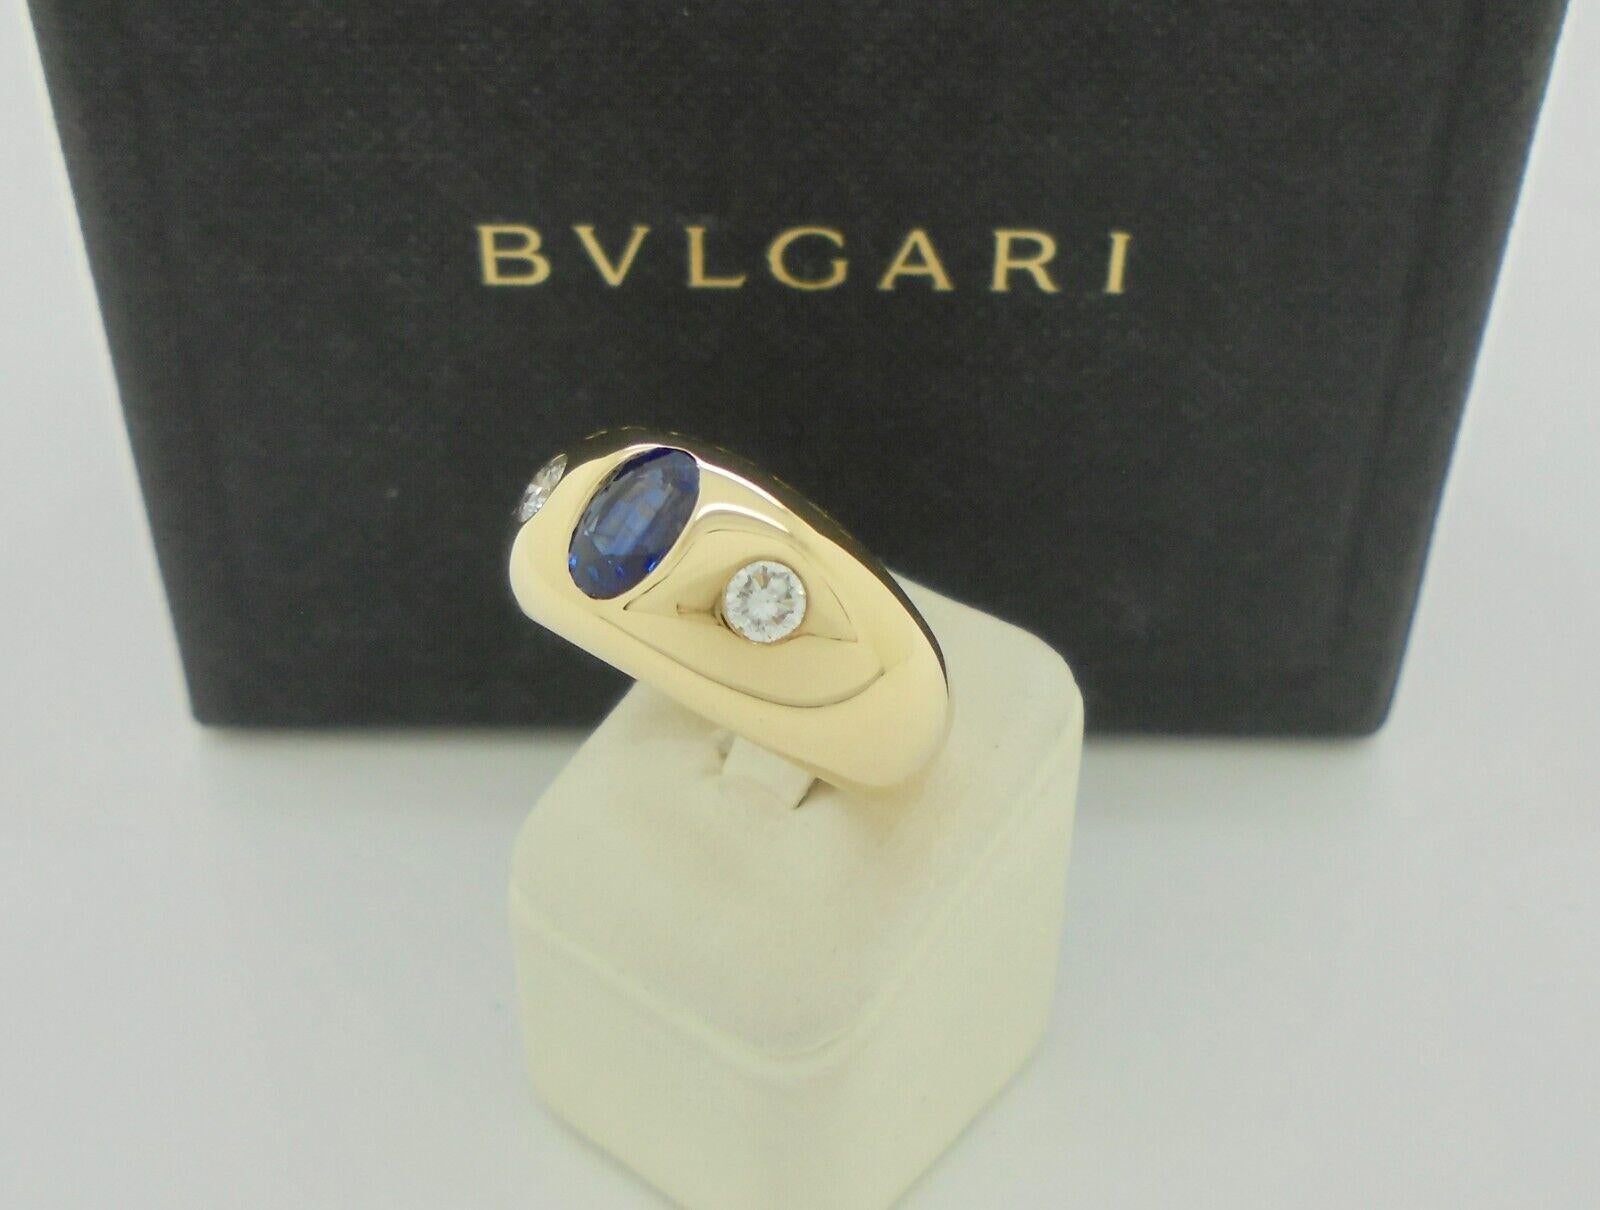 Bvlgari Italy 18k Yellow Gold, Diamond & Sapphire Three Stone Ring w/Box Vintage

Here is your chance to purchase a beautiful and highly collectible designer ring.  
Authentic Bvlgari Bulgari Sapphire Diamond 18k Yellow Gold Ring in Box

Brand: